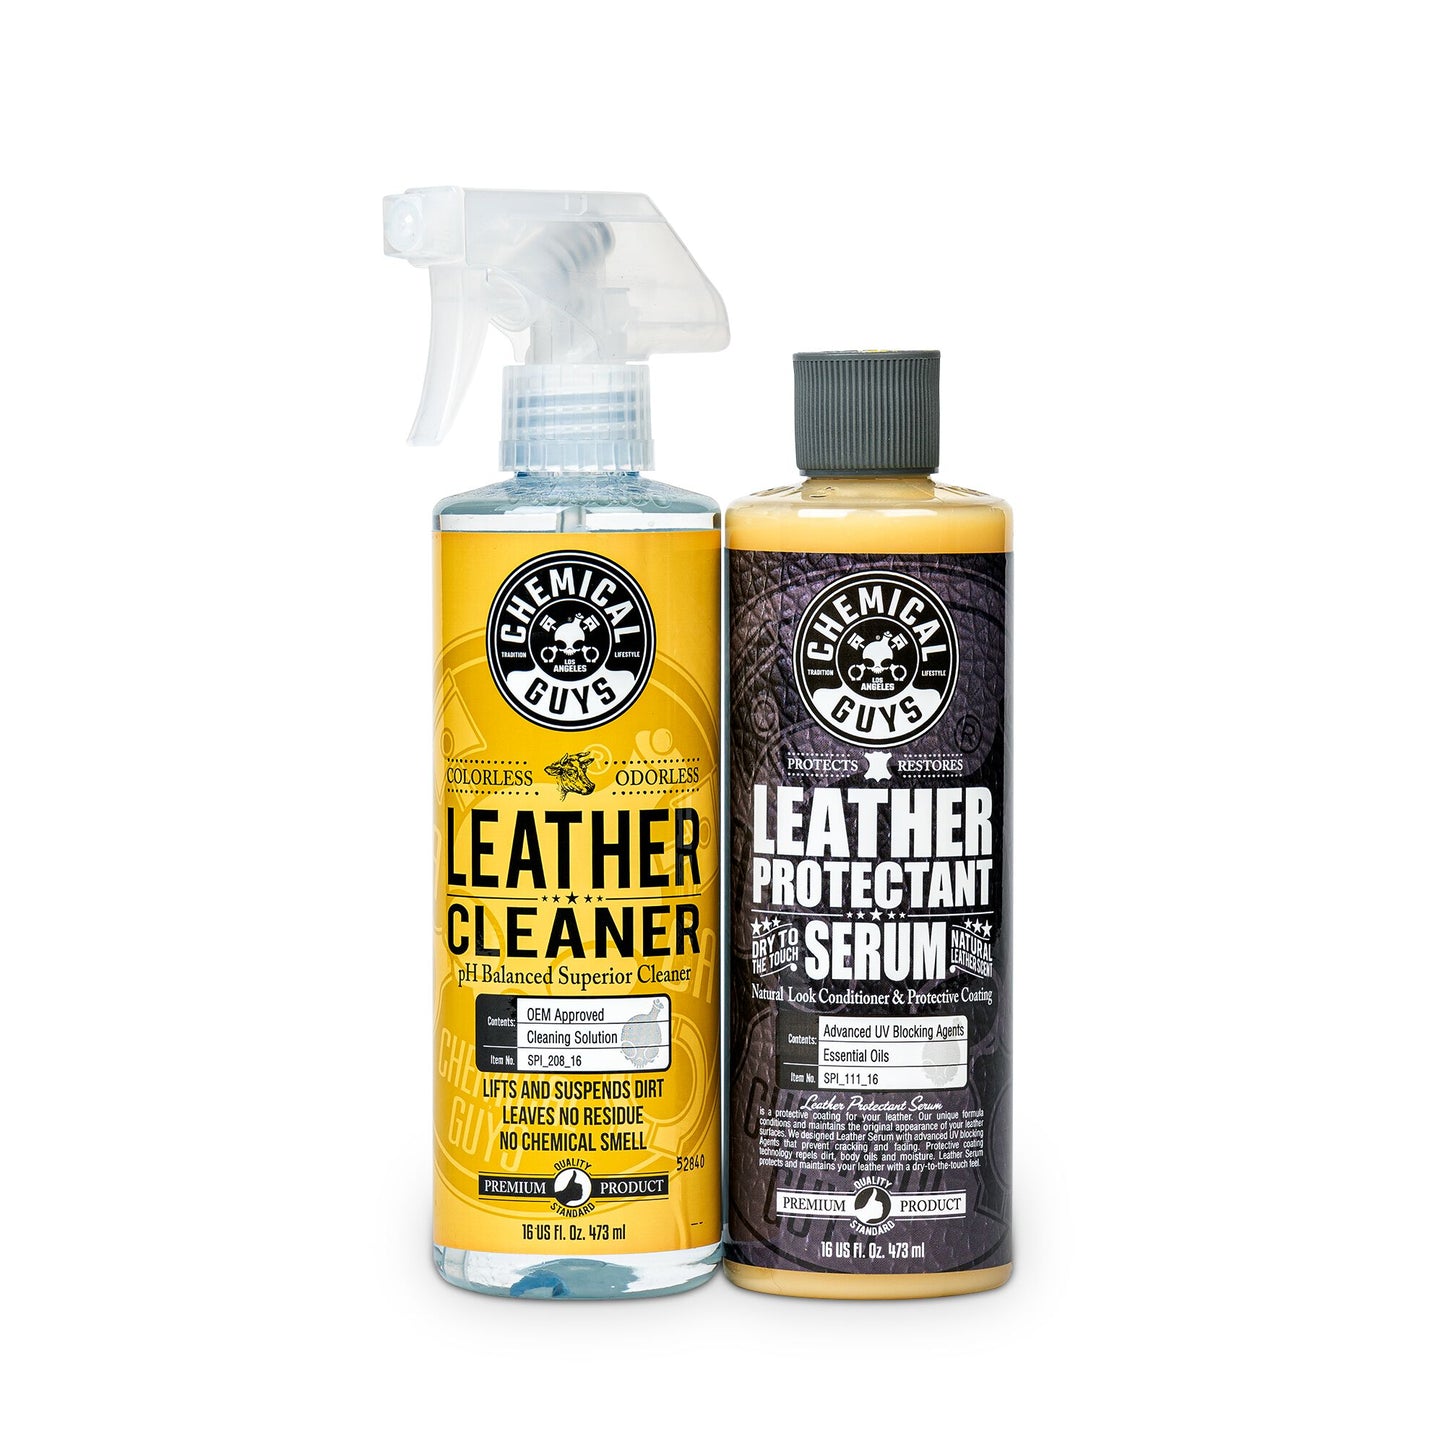 Leather Cleaner & Protectant Serum Complete Leather Kit